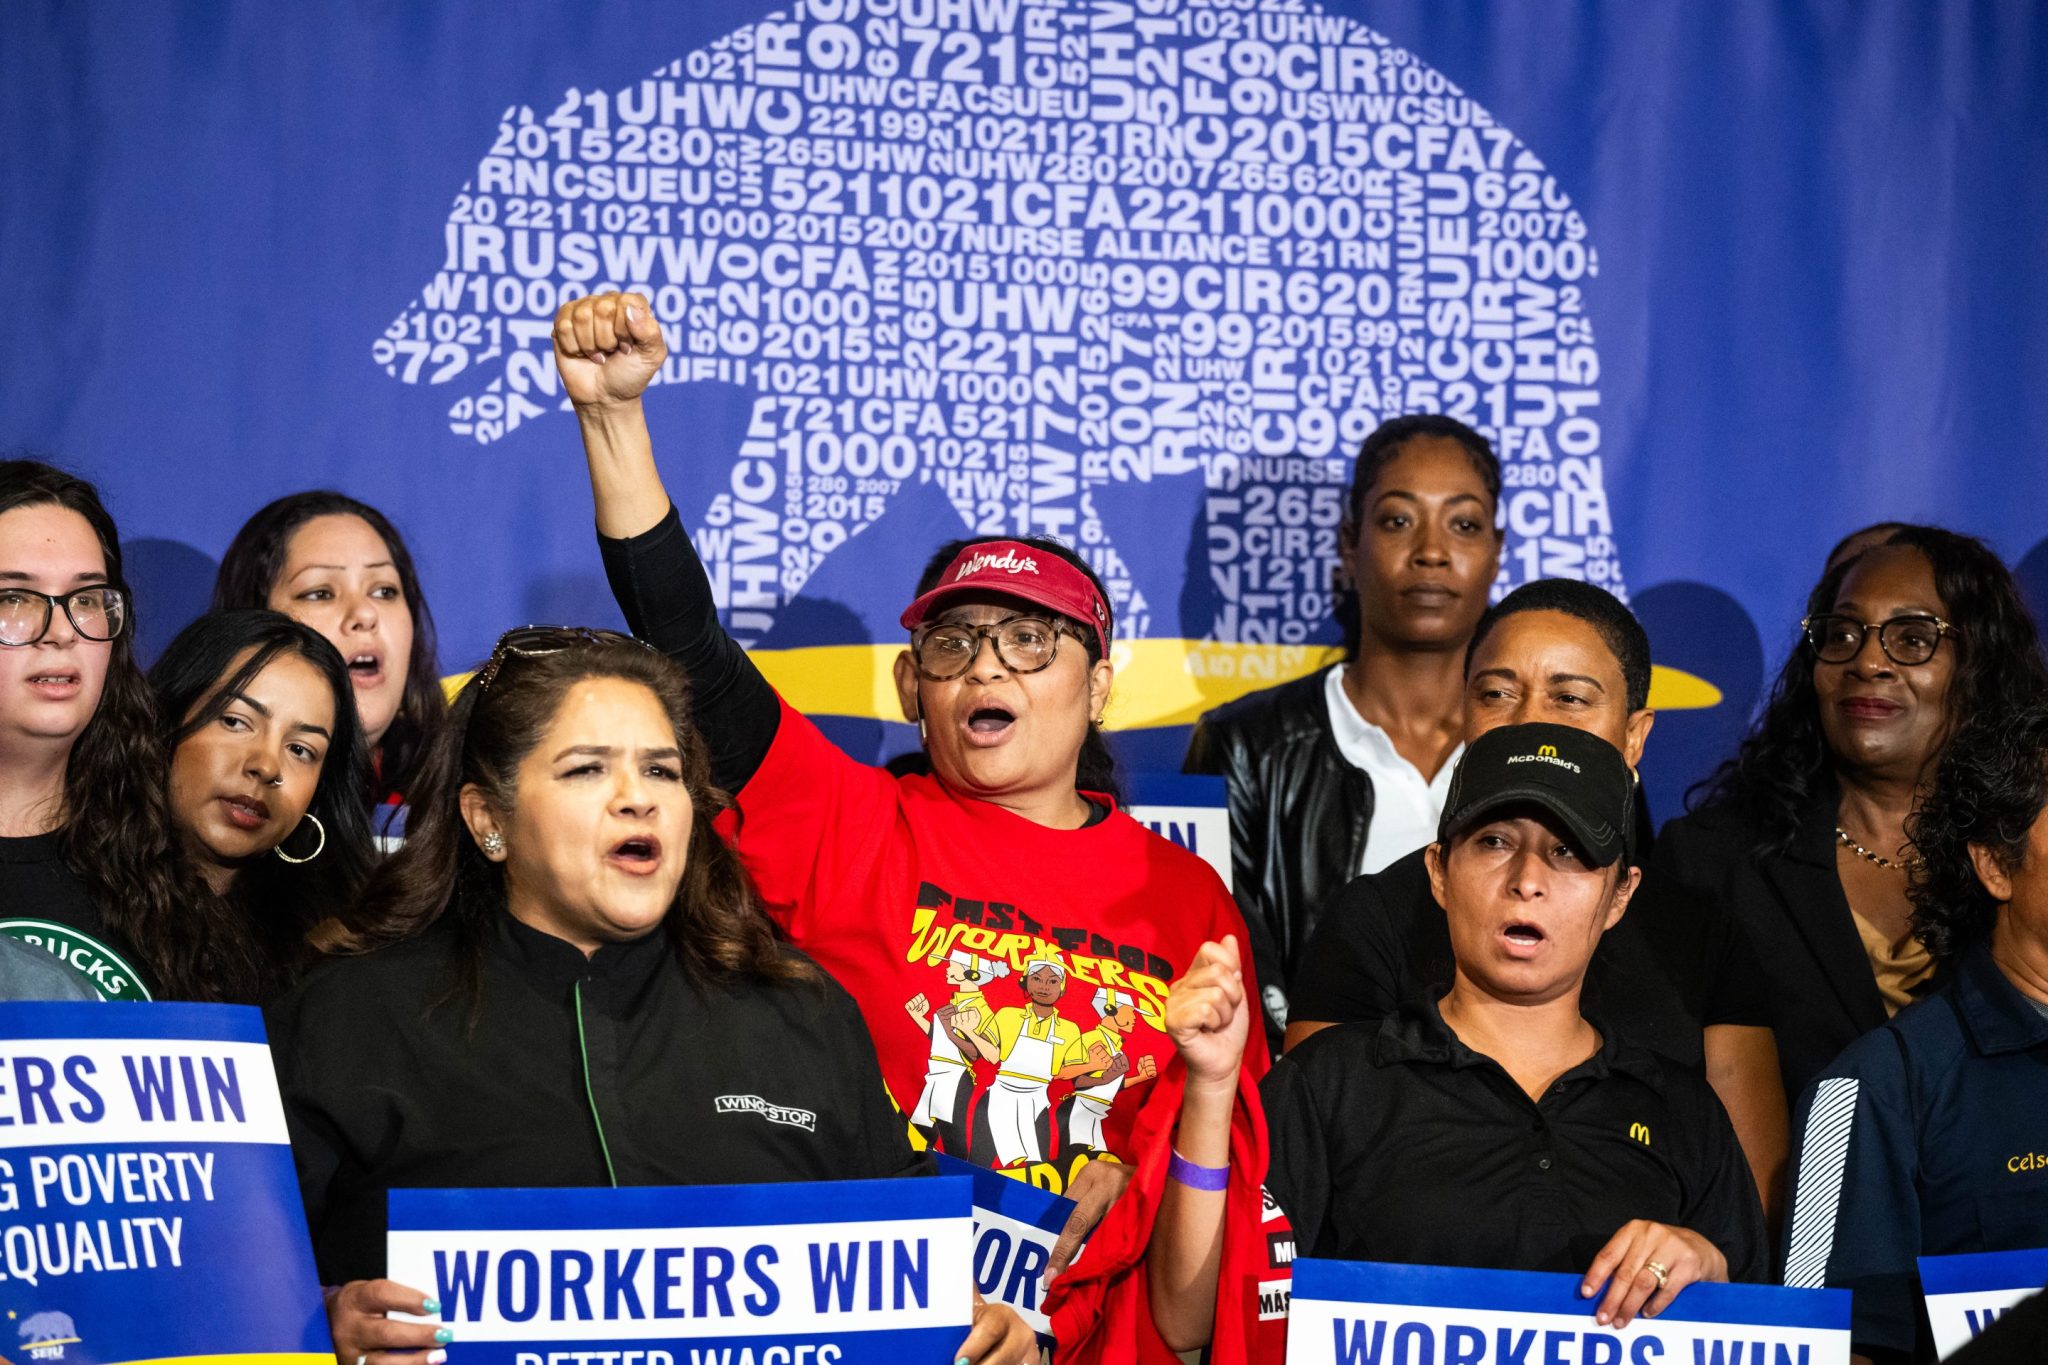 California’s $20 minimum wage could hike its unemployment rate, Scott Sumner says